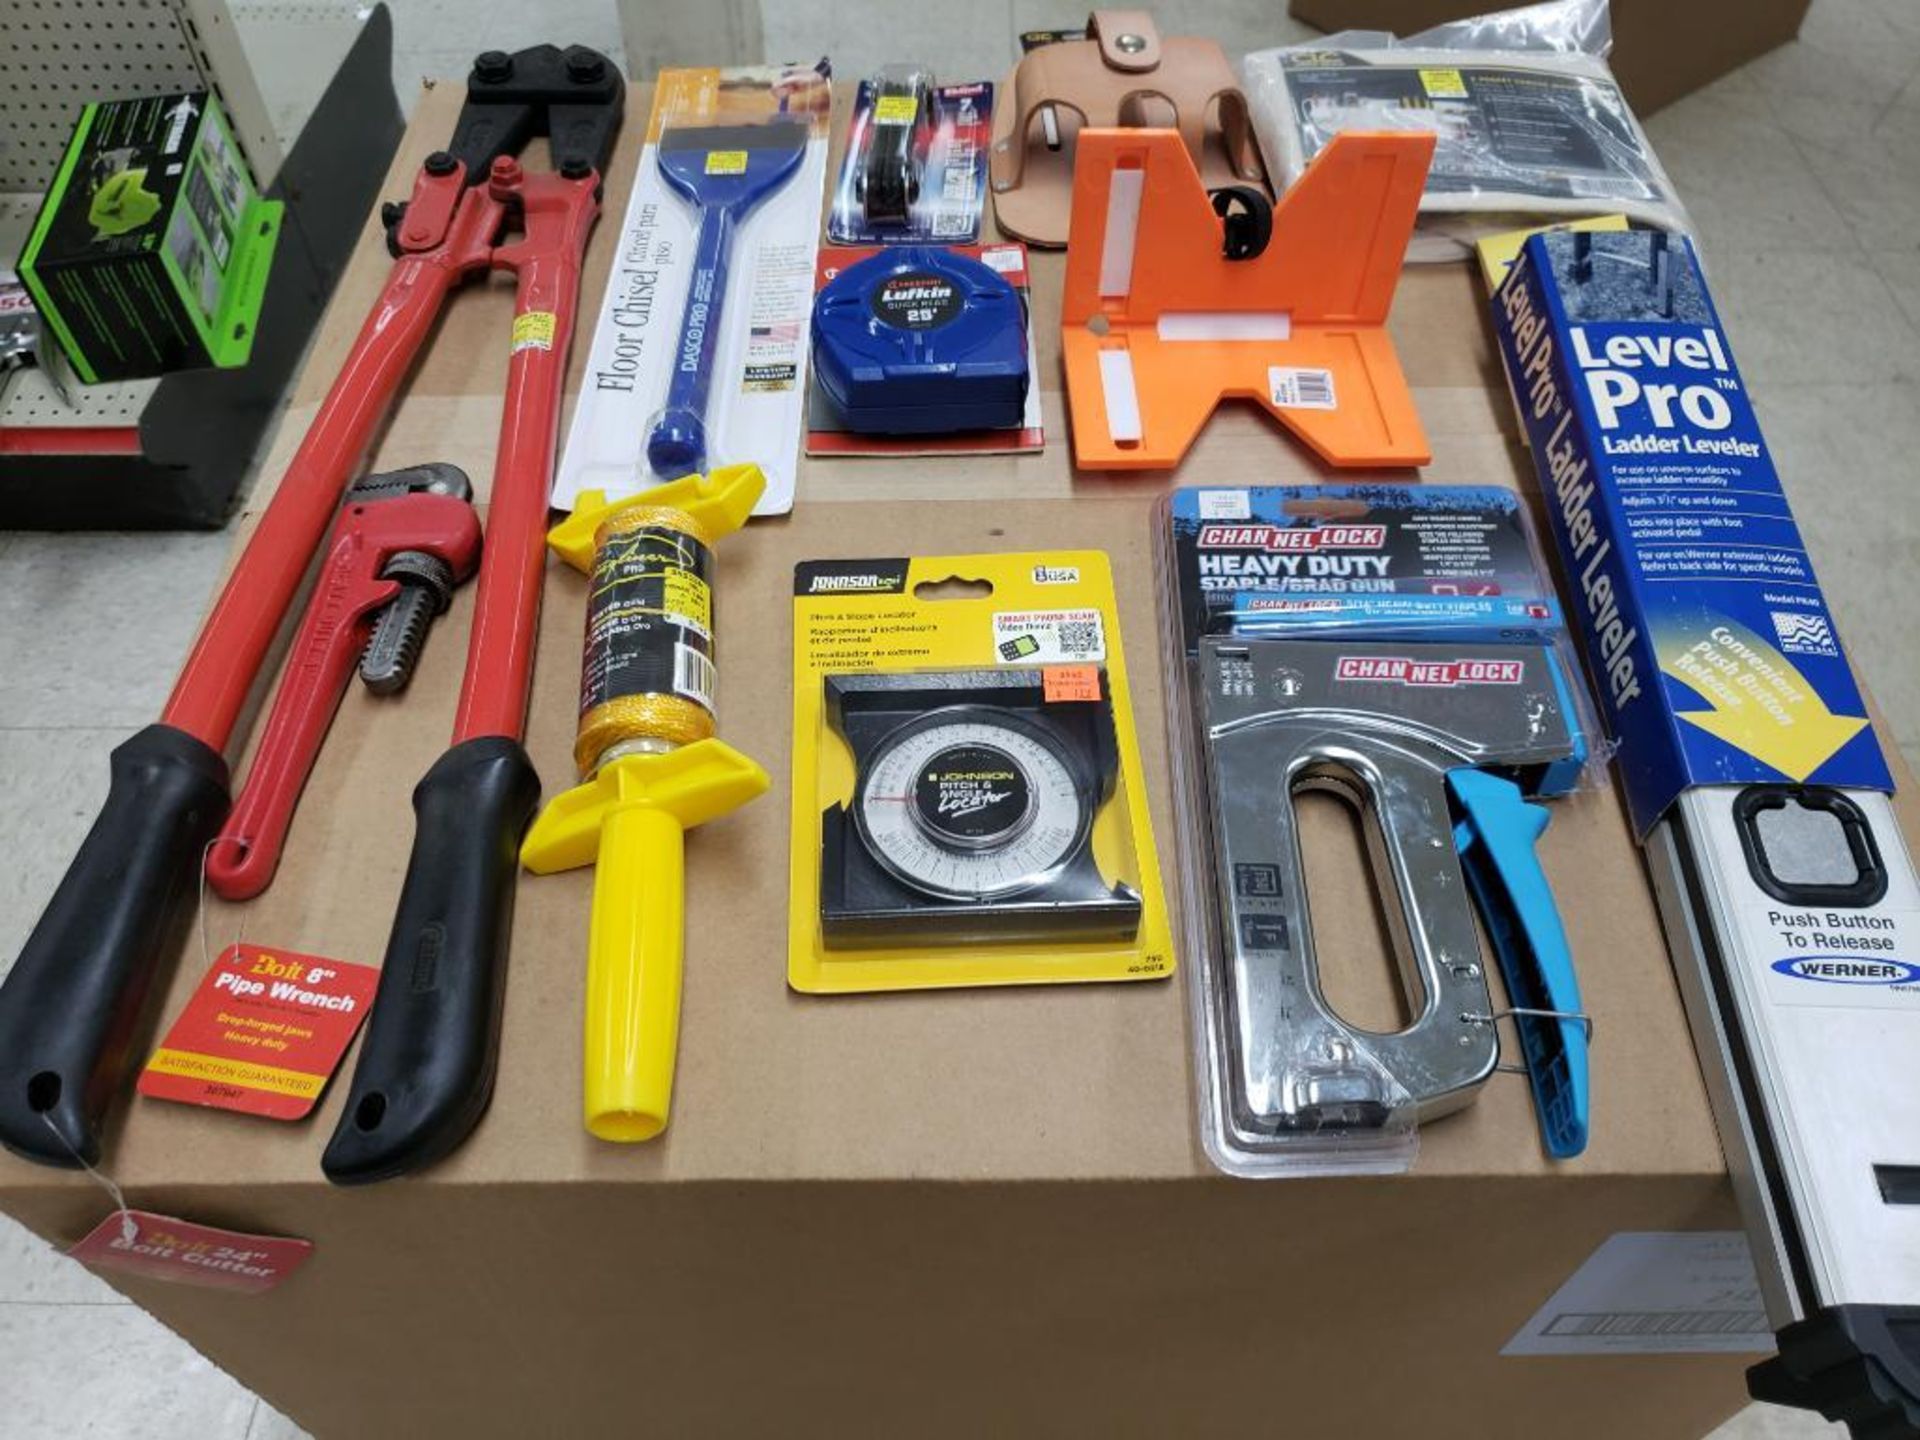 Large assortment of tools. New as pictured. - Image 8 of 9